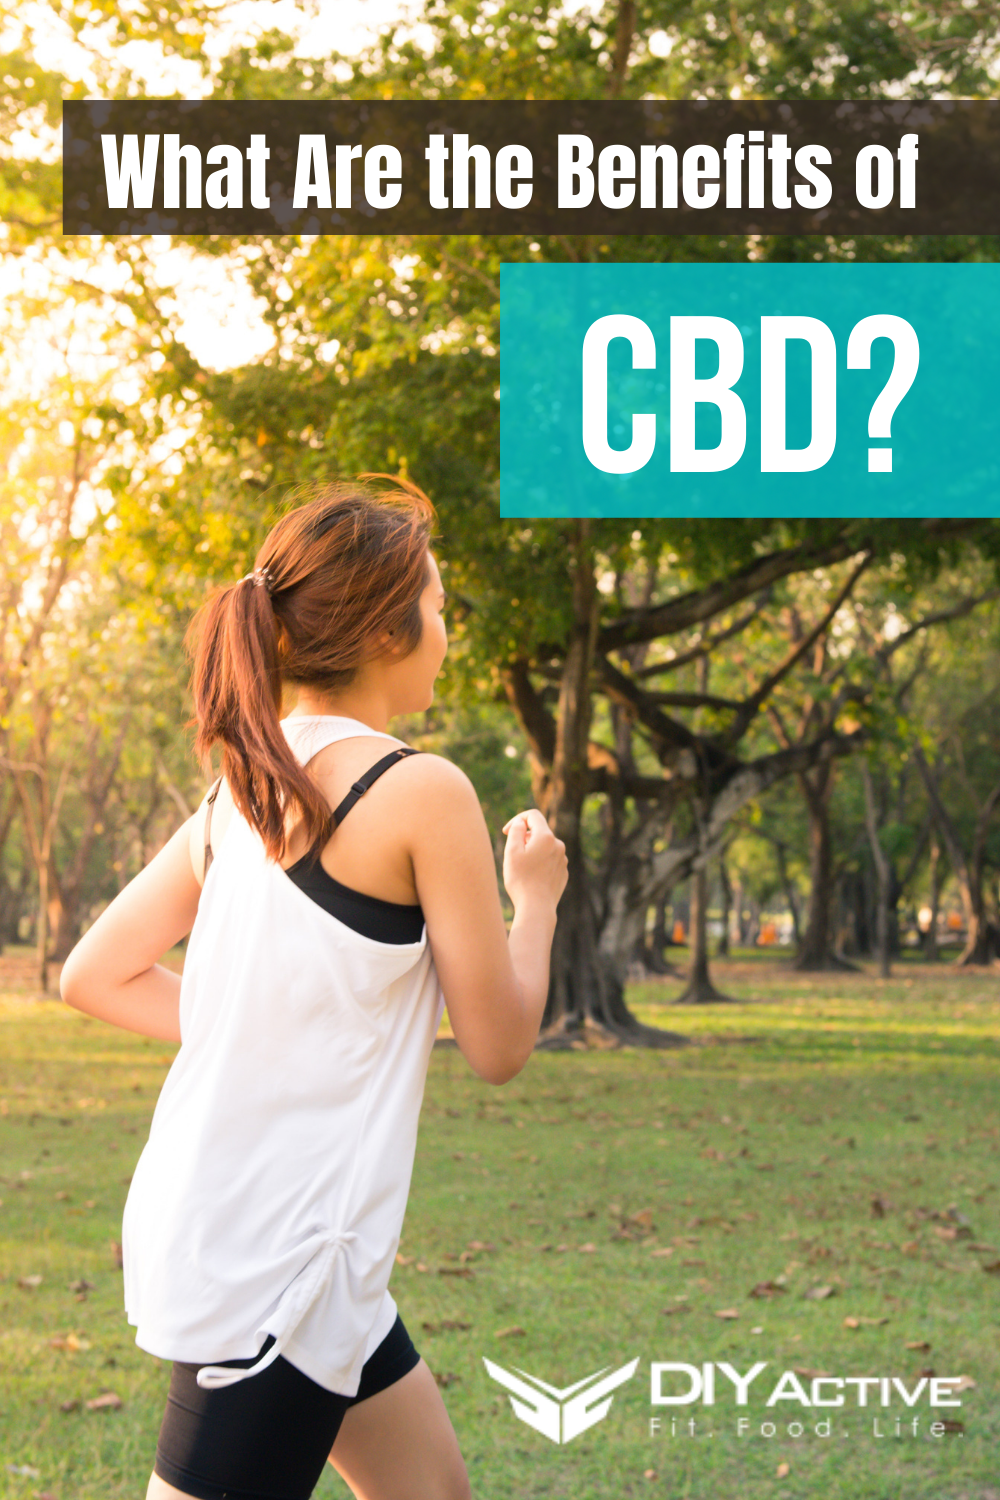 What Are the Benefits of CBD You Need to Know?